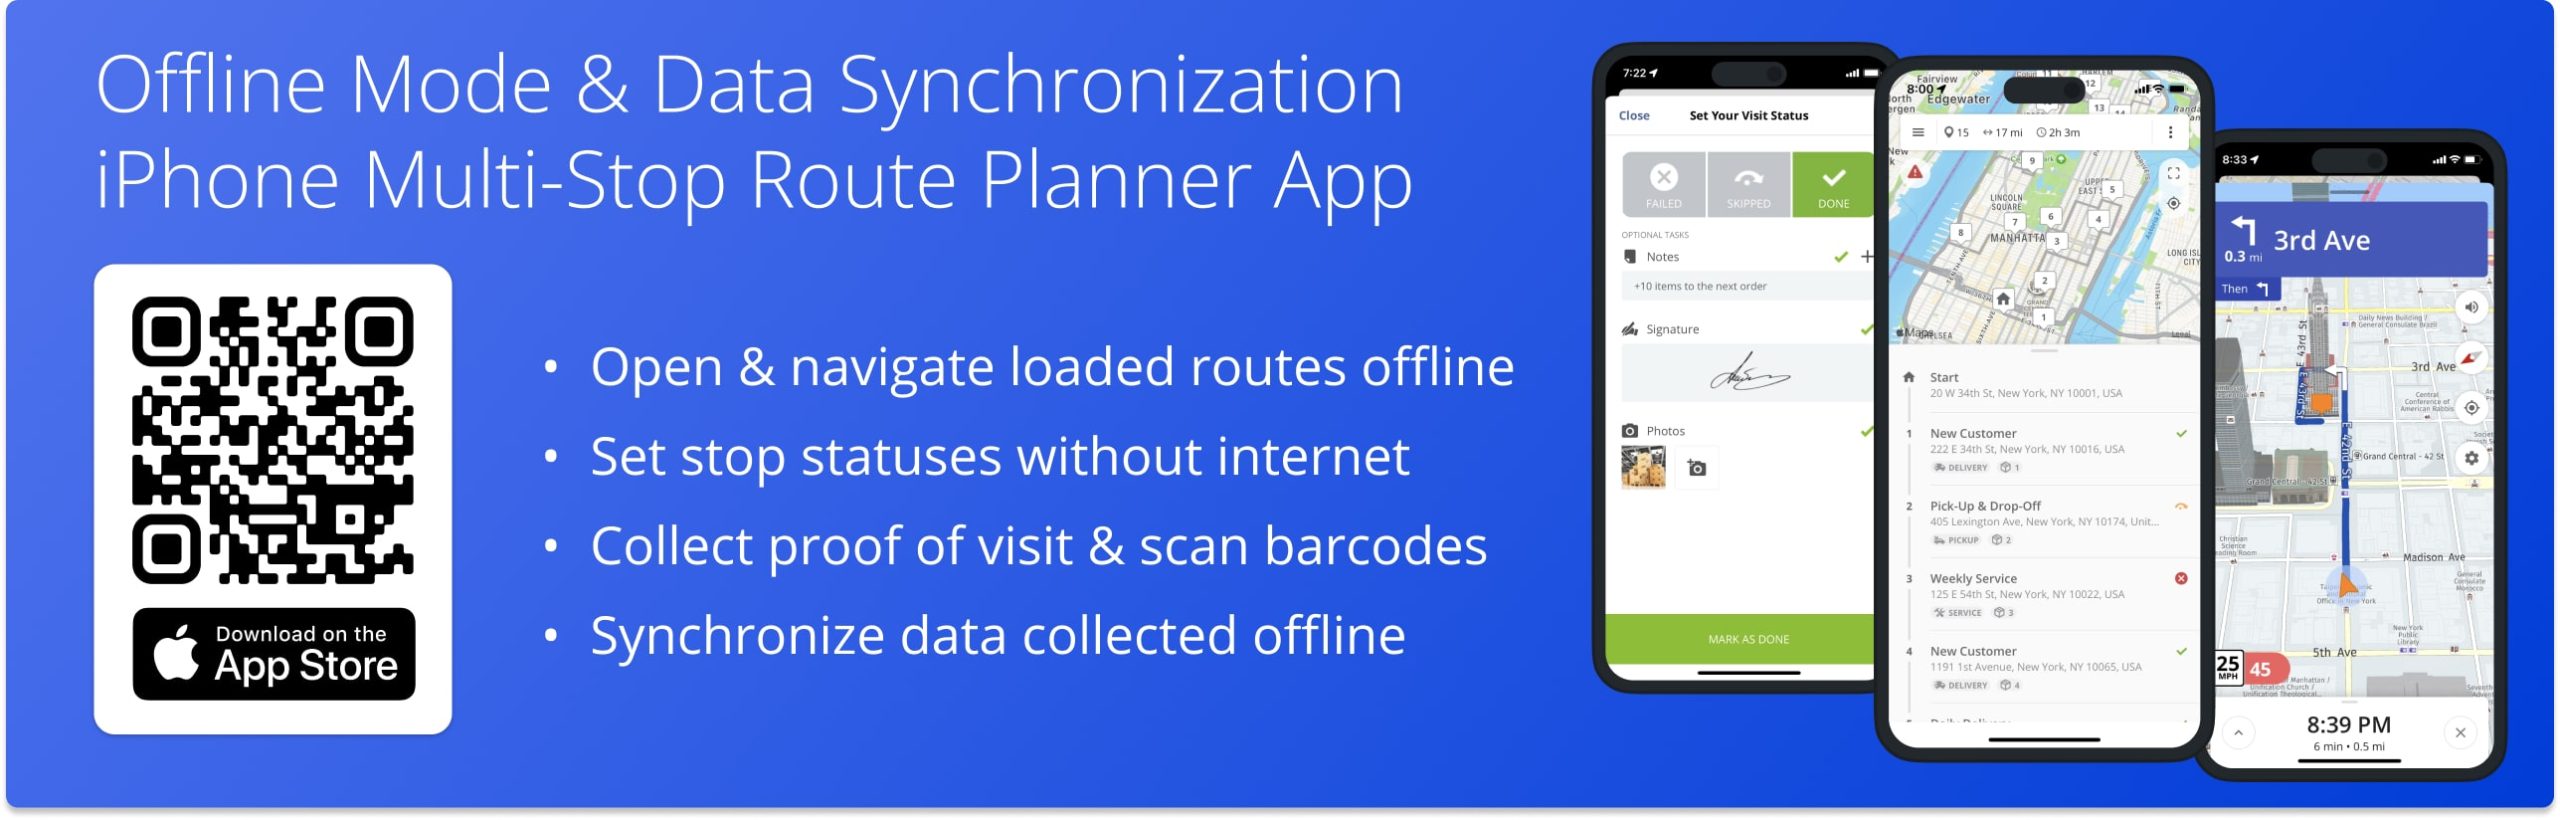 Offline Mode on Route4Me's Mobile Route Planner app for navigating routes and collecting proof of visit without an internet connection.